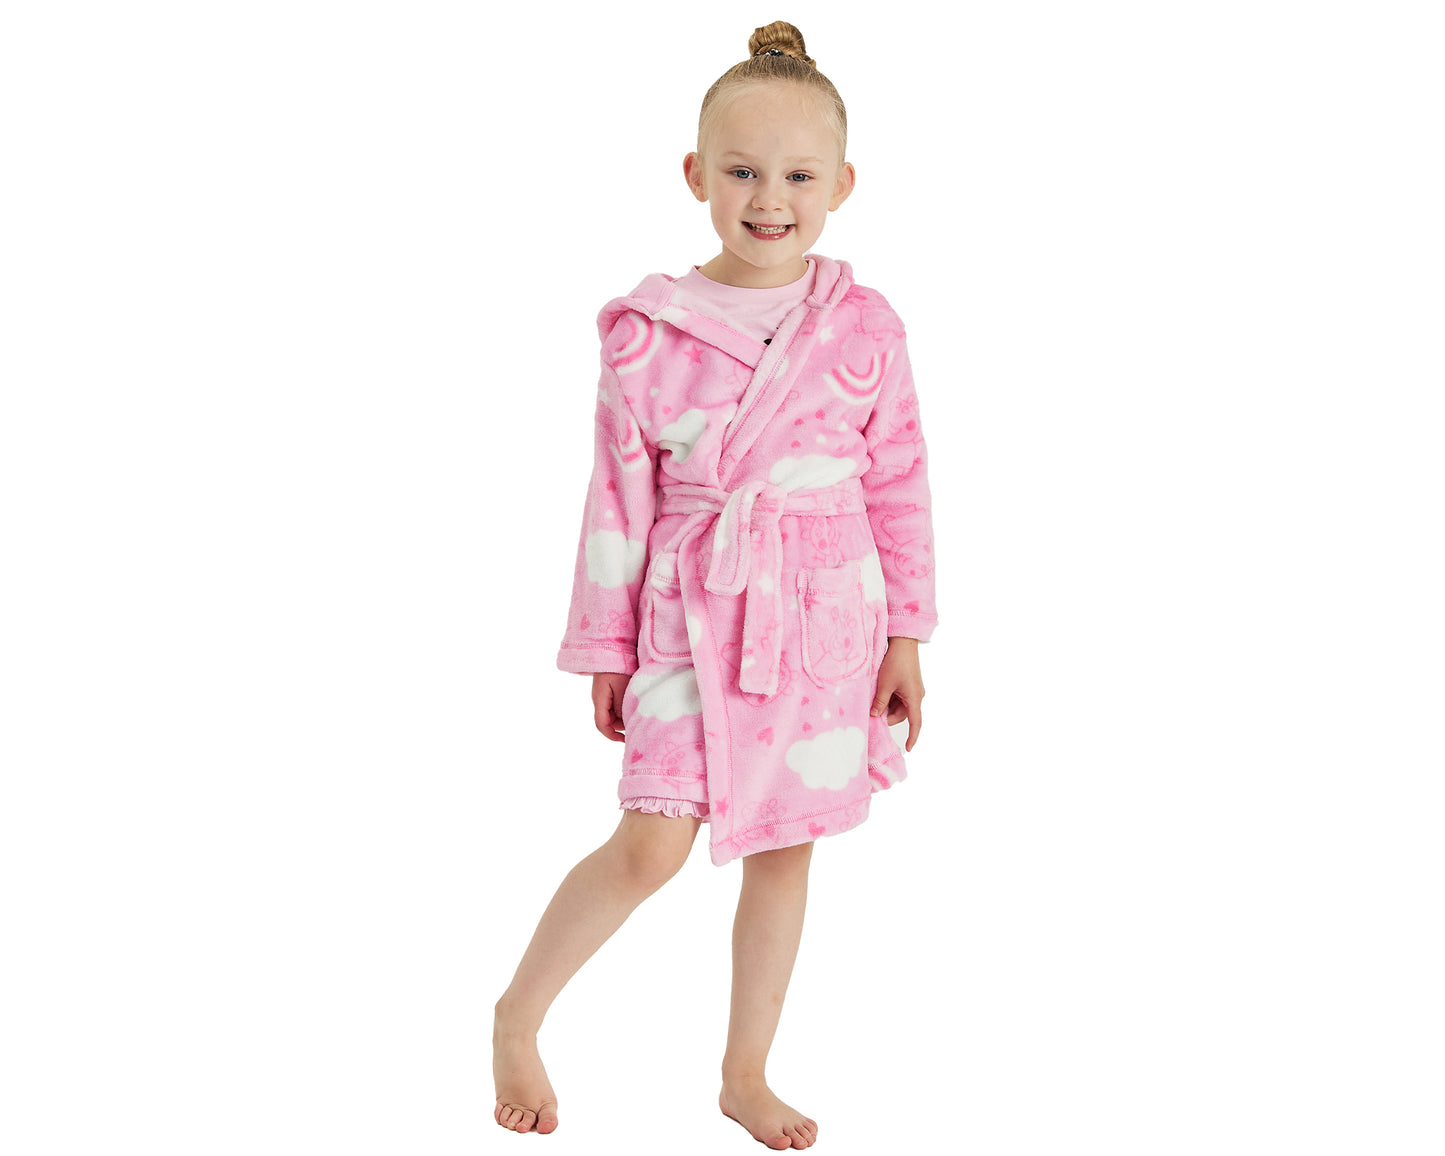 Girls Peppa Pig Dressing Gown - Pink & White